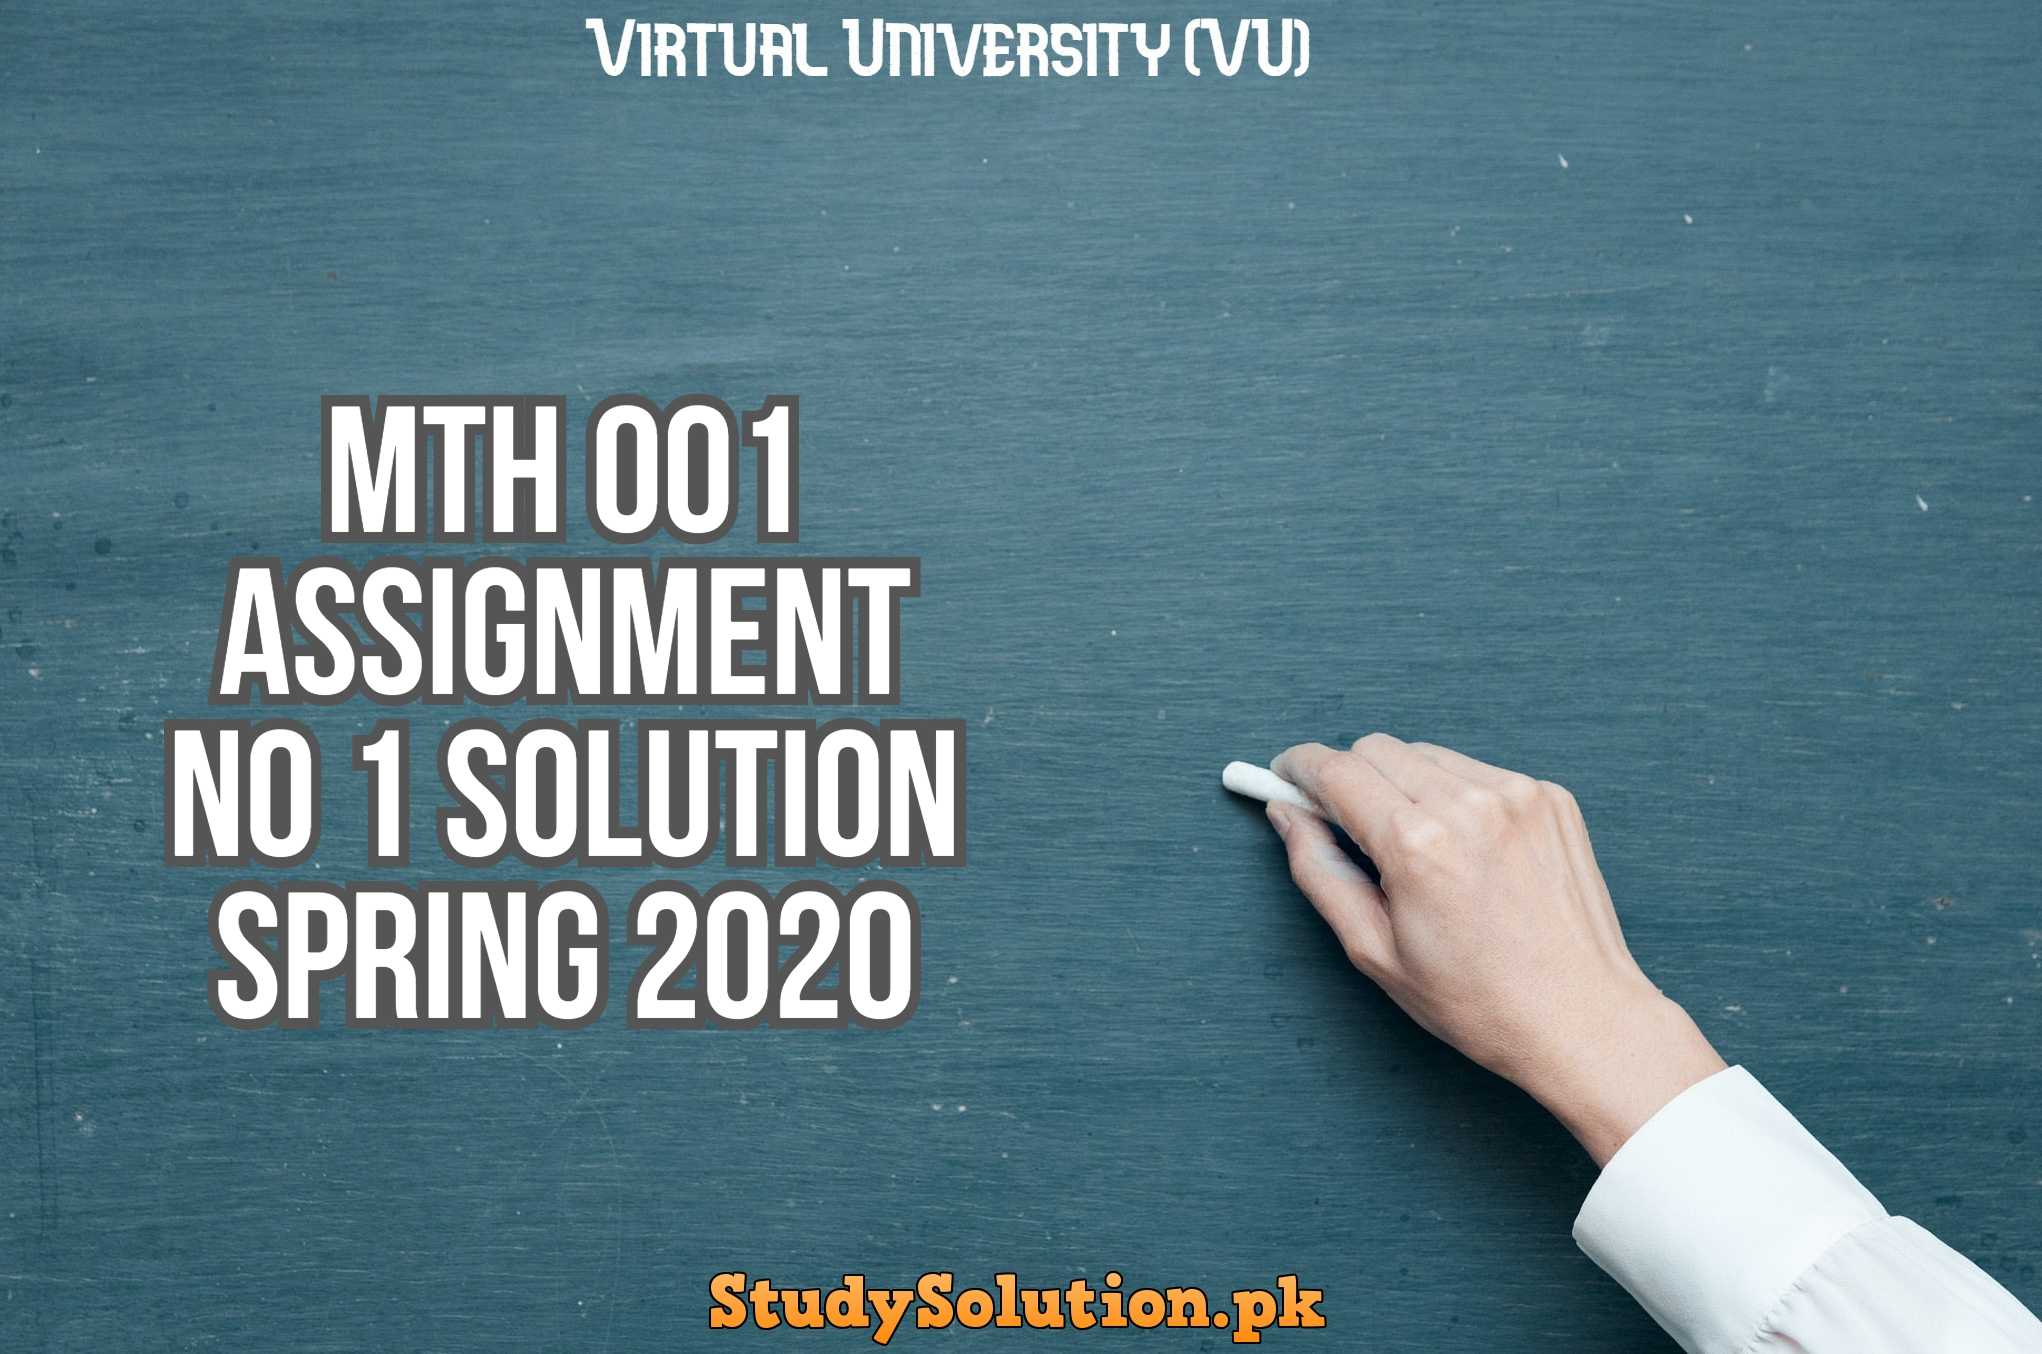 MTH 001 Assignment No 1 Solution Spring 2020